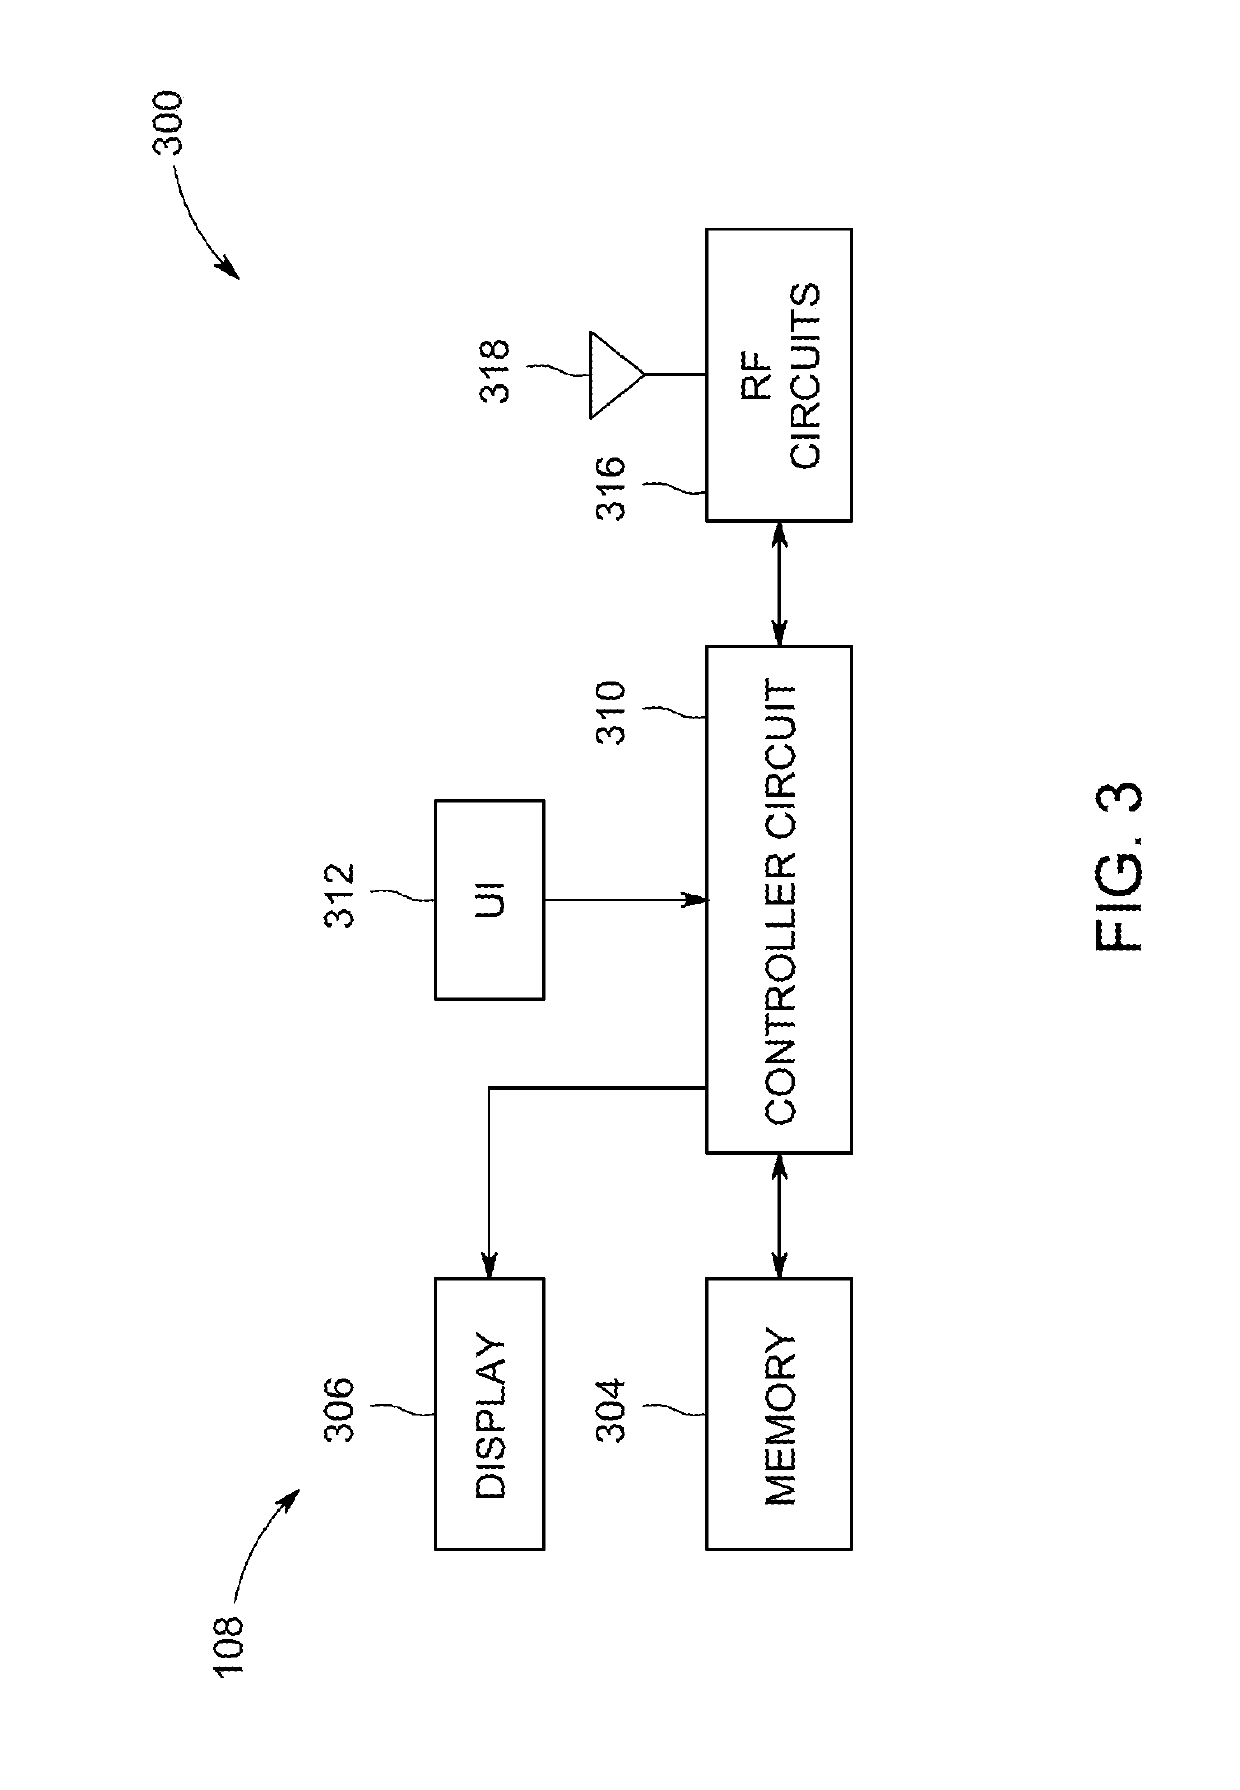 Systems and methods for environment sensing